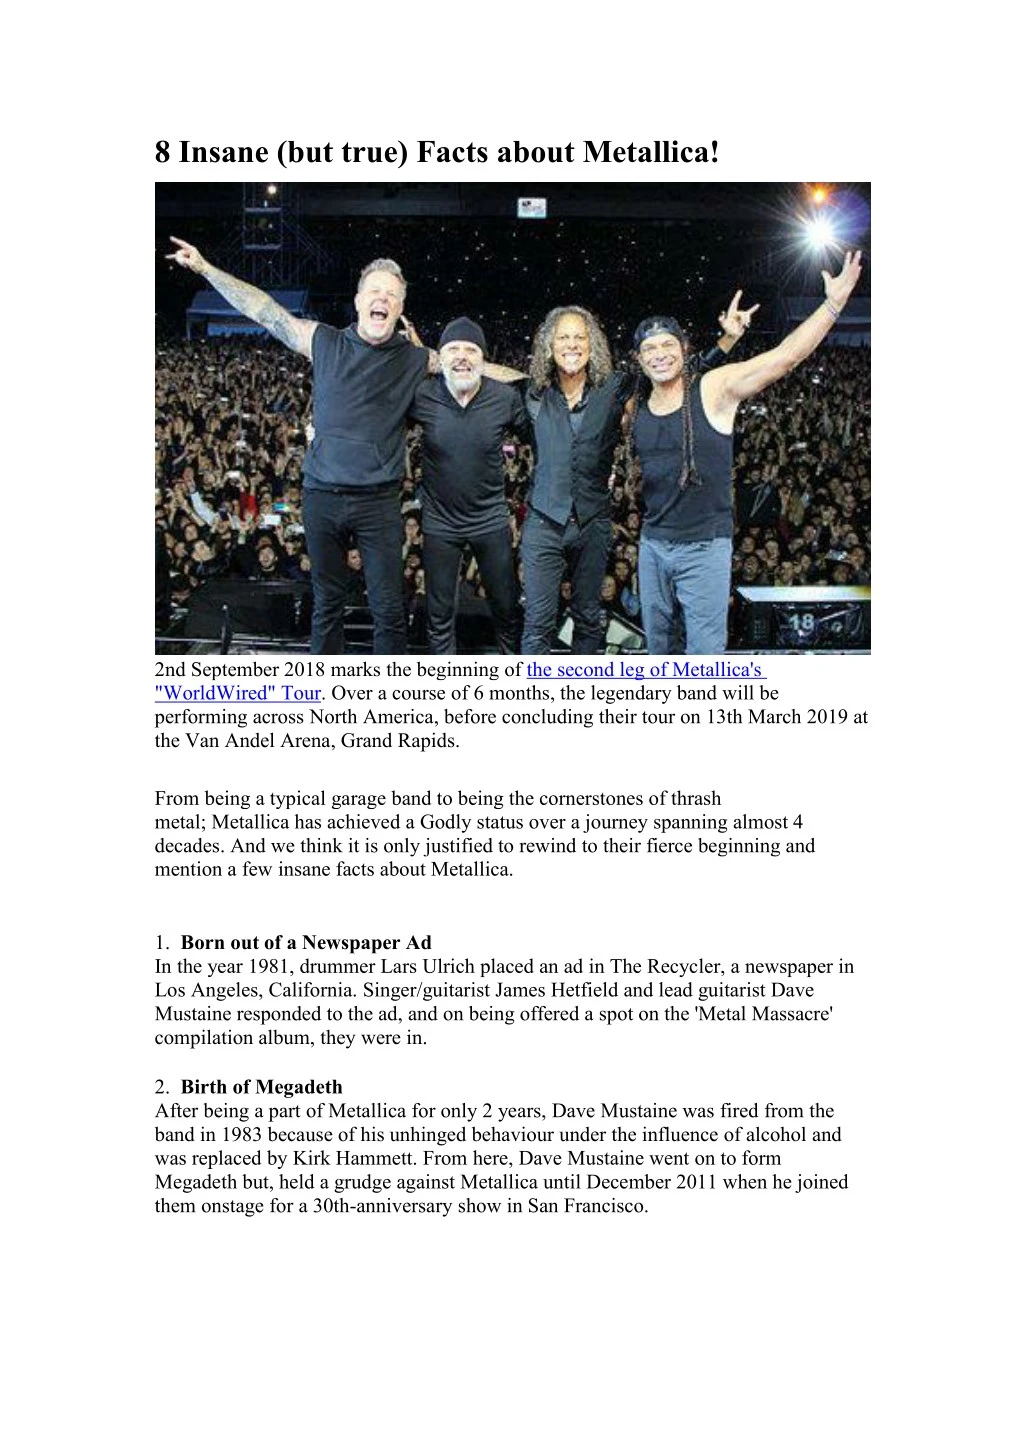 8 insane but true facts about metallica